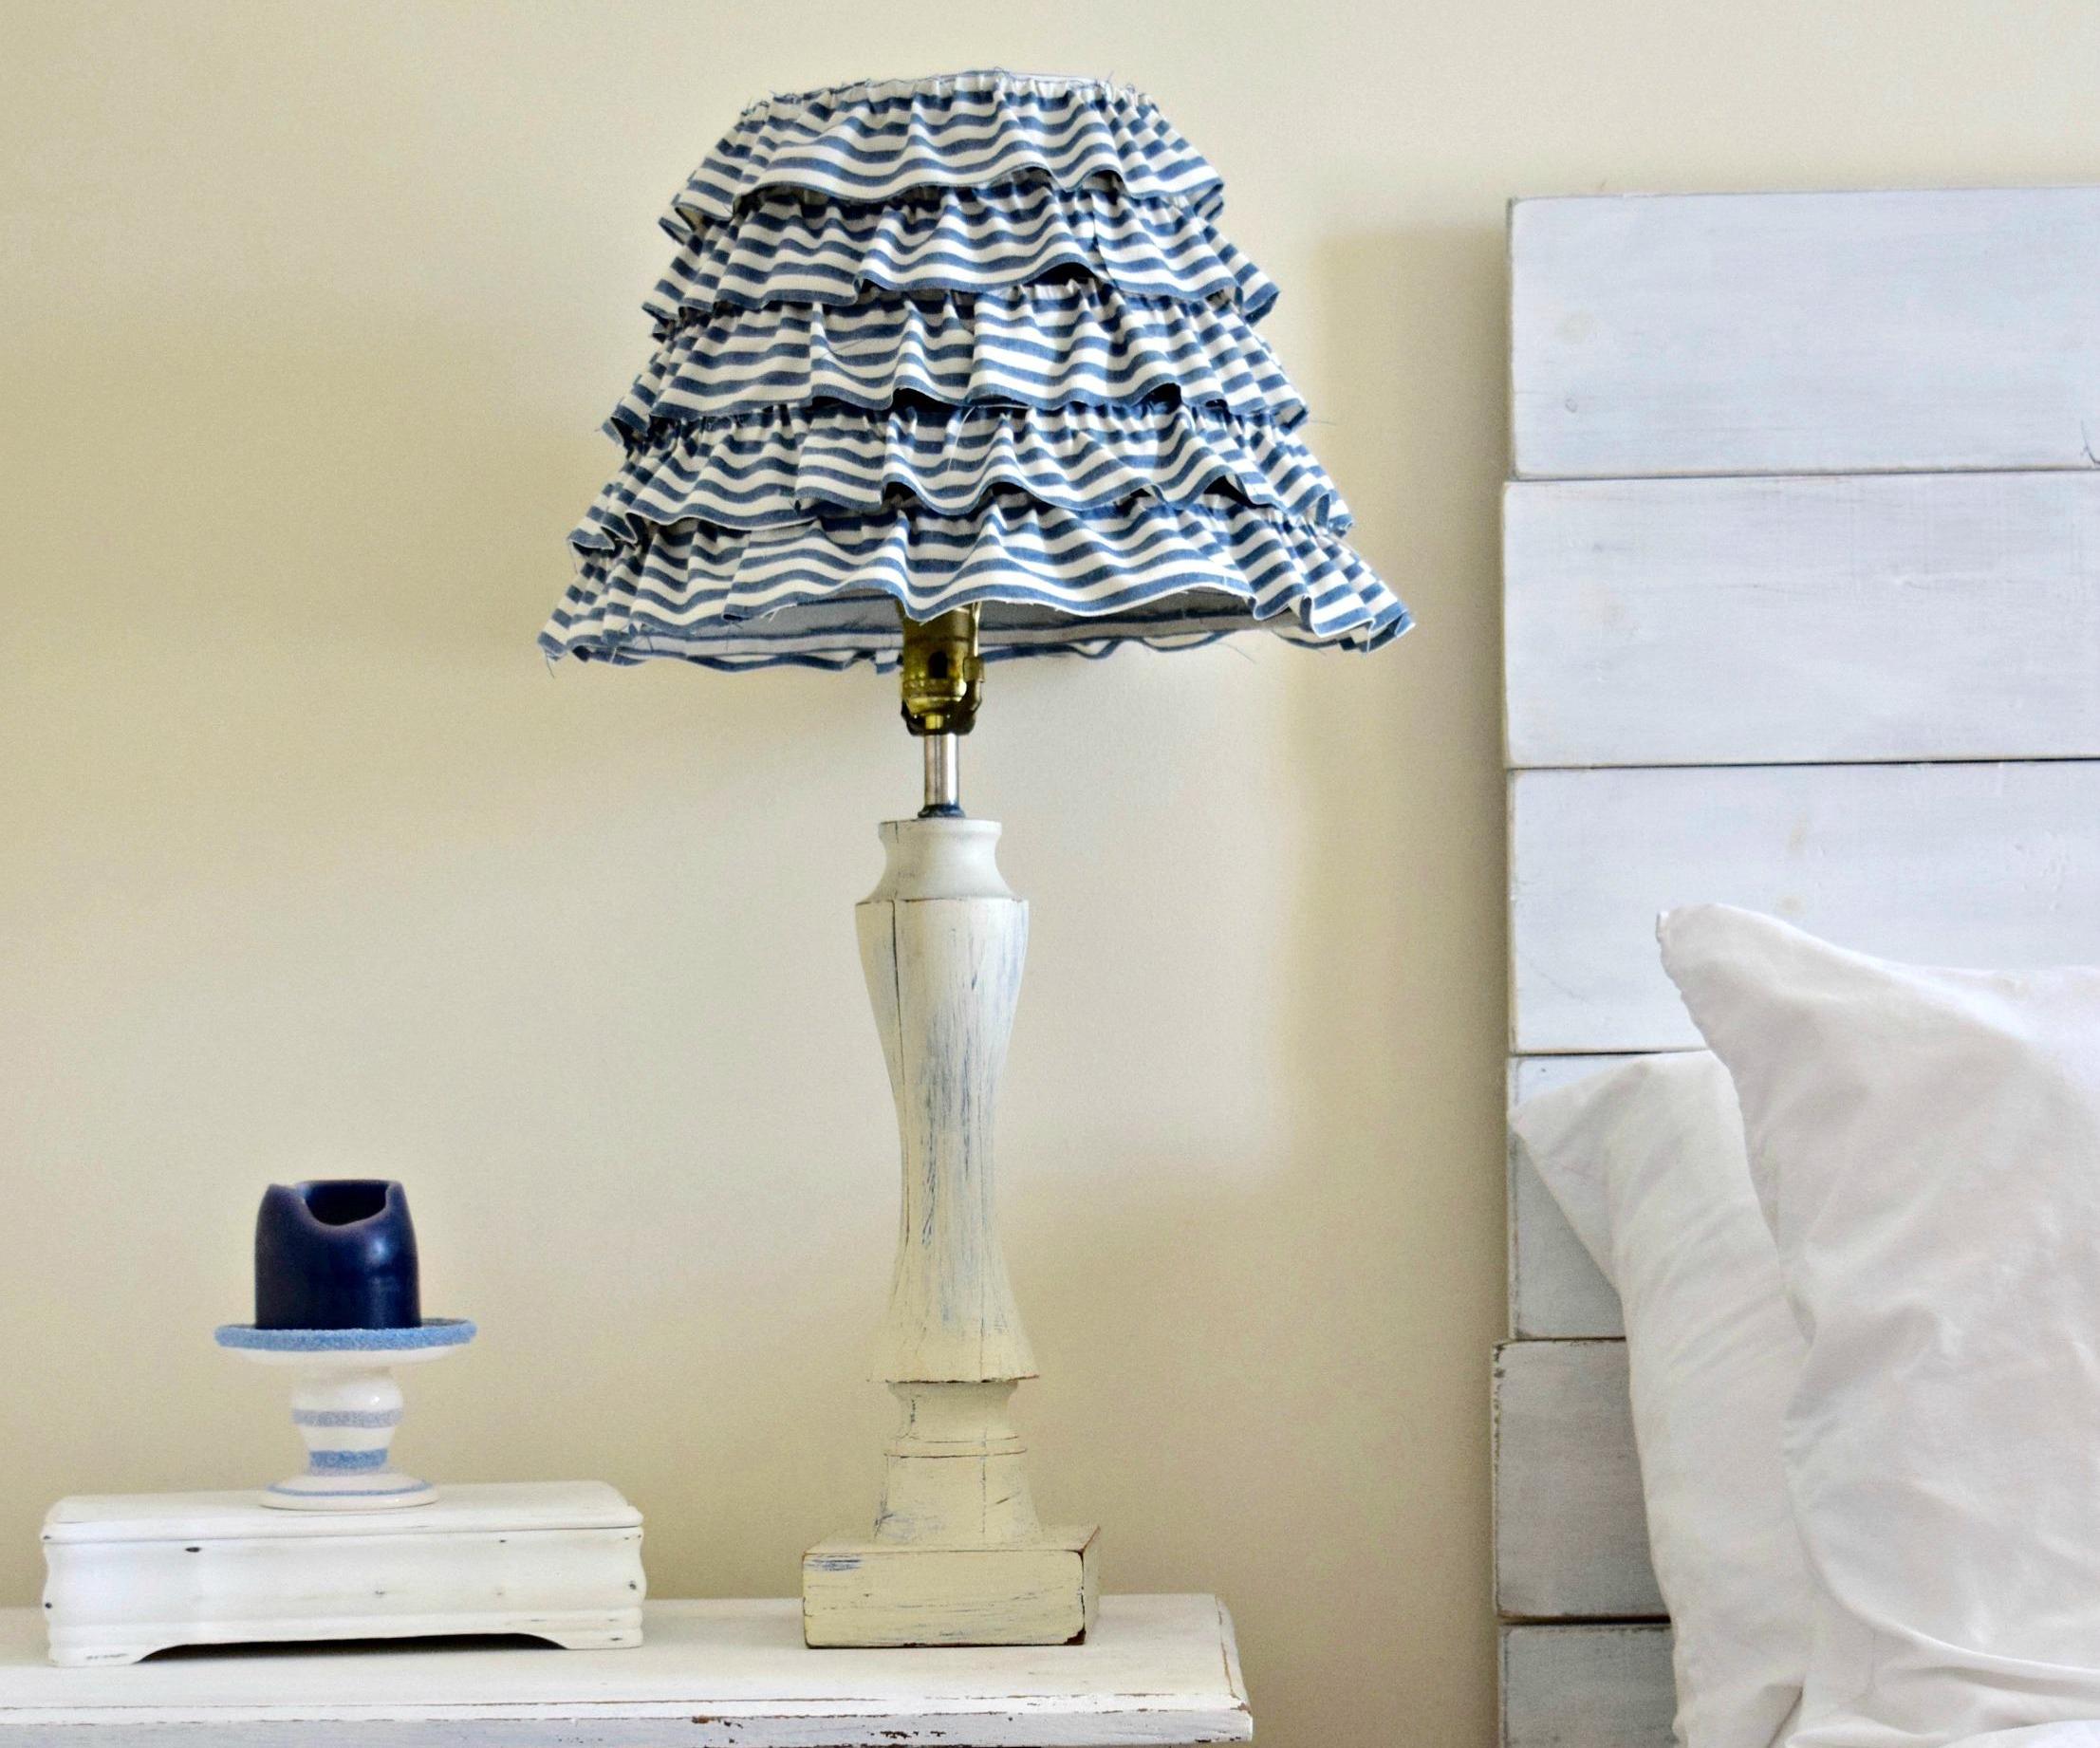 How to Update an Old Lamp With Fabric